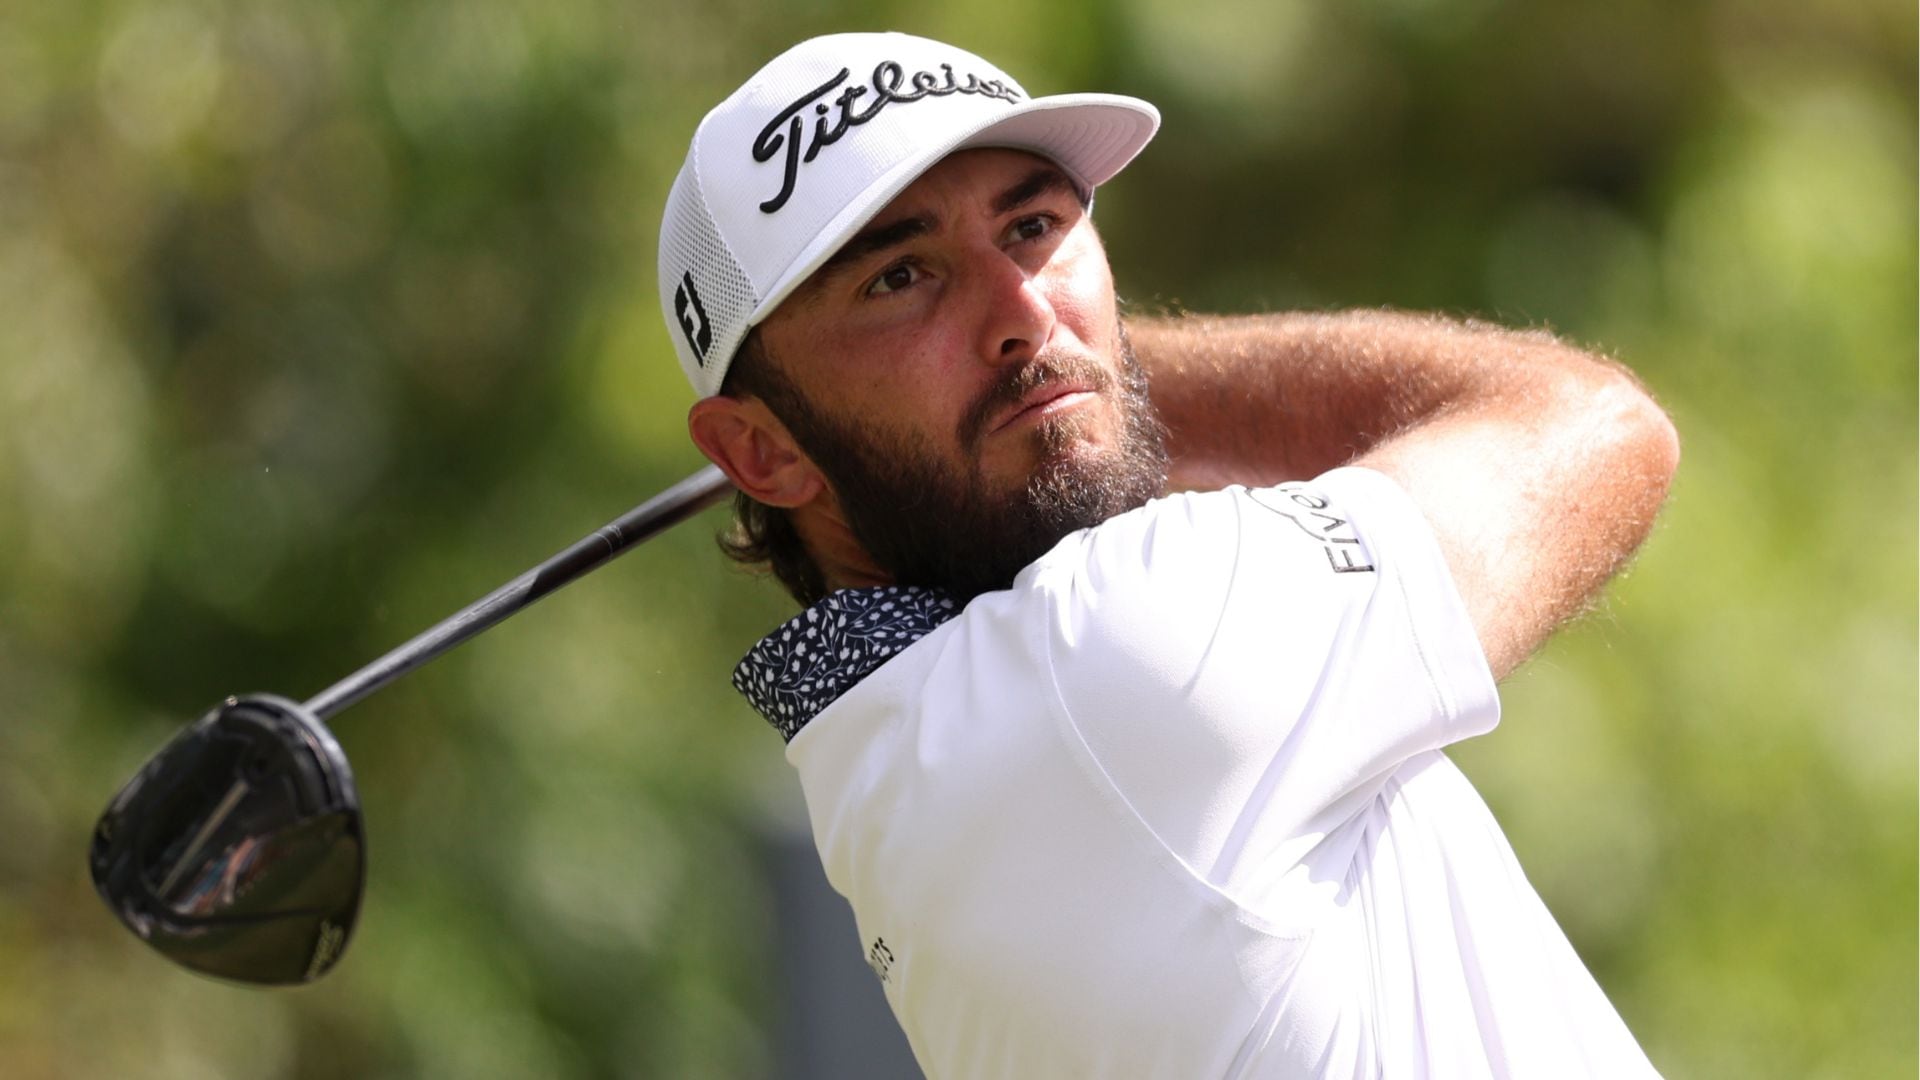 Max Homa climbs up leaderboard in final round of Players Championship, hits flagstick on par-4